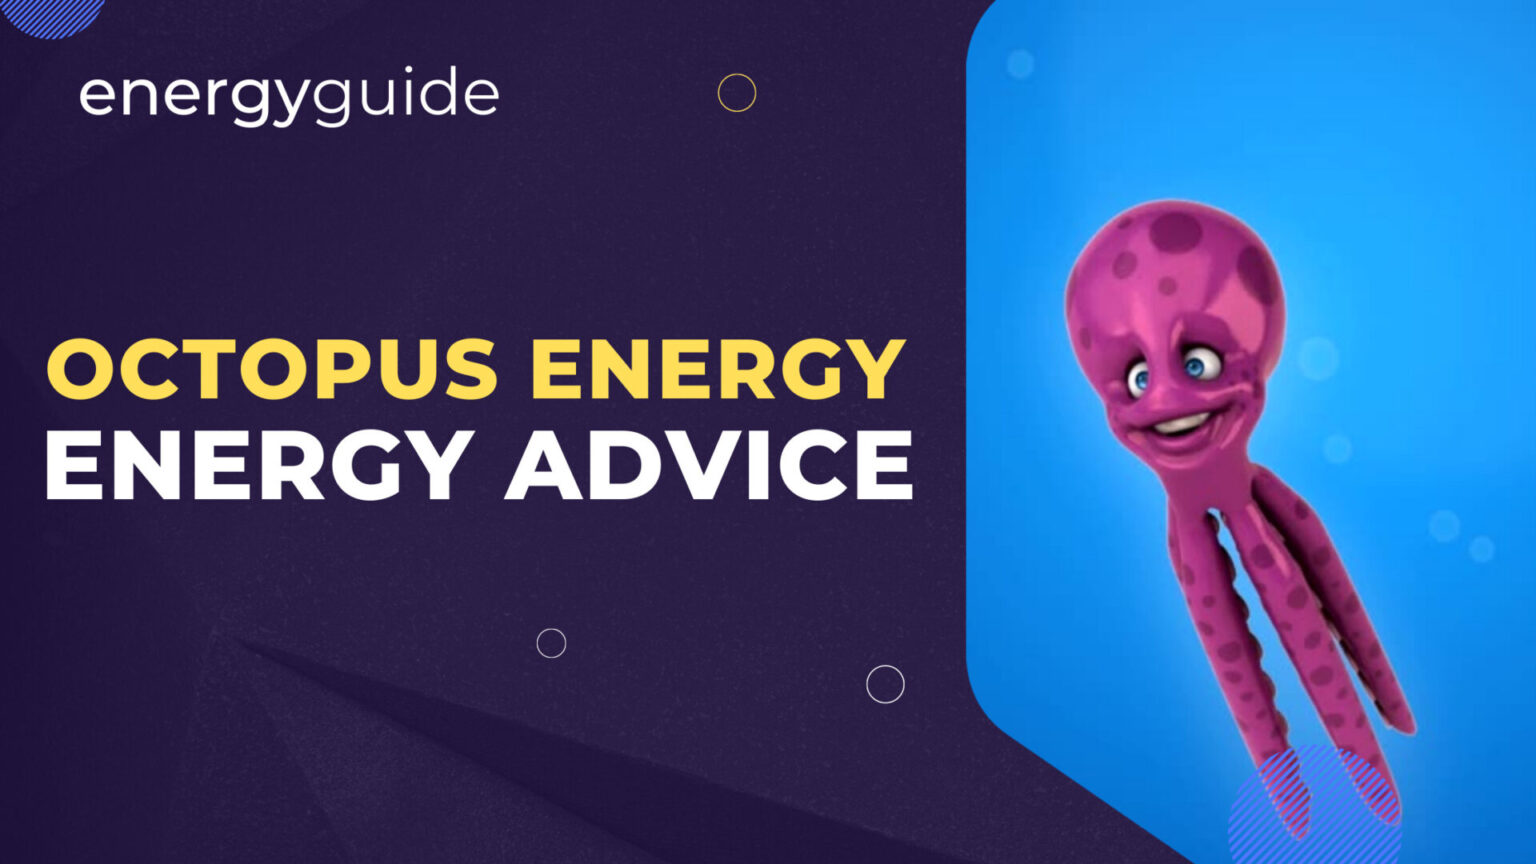 Octopus Energy Review